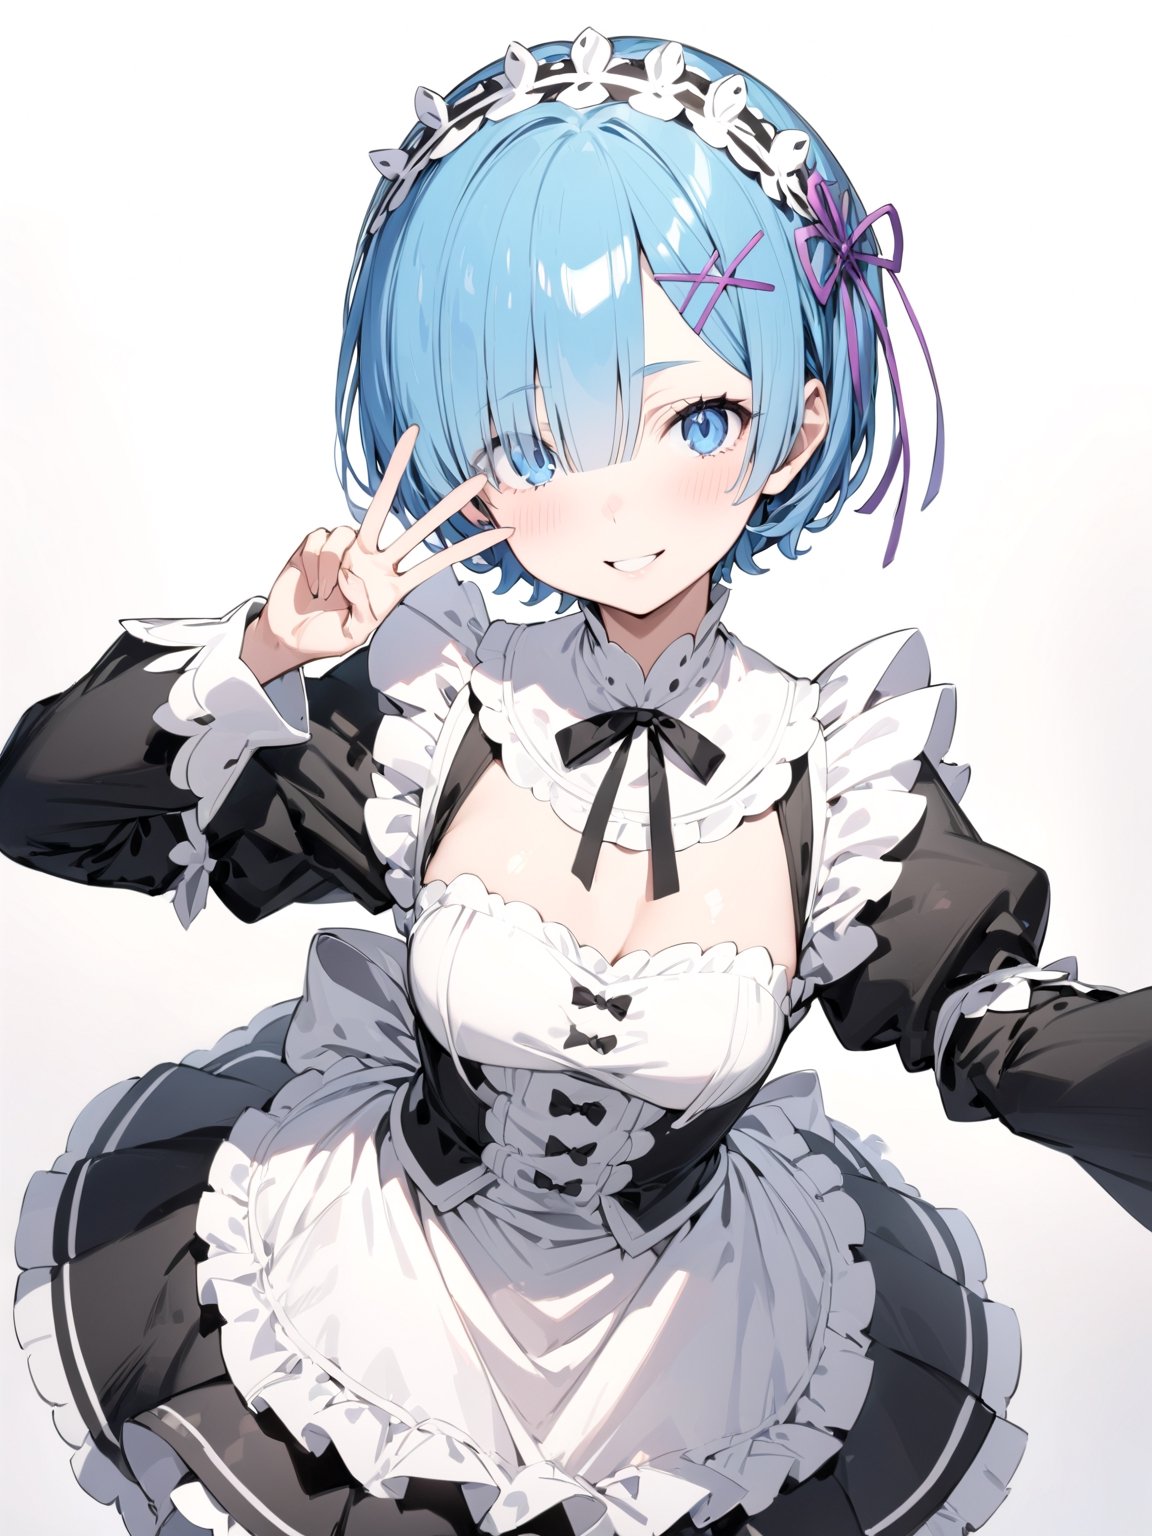 //Quality,
masterpiece, best quality, detailed
,//Character,
solo,rem \(re_zero\), 1girl, blue eyes, blue hair, short hair
,//Fashion,
roswaal mansion maid uniform, hair ribbon
,//Background,
white_background, simple_background
,//Others,
smile, V